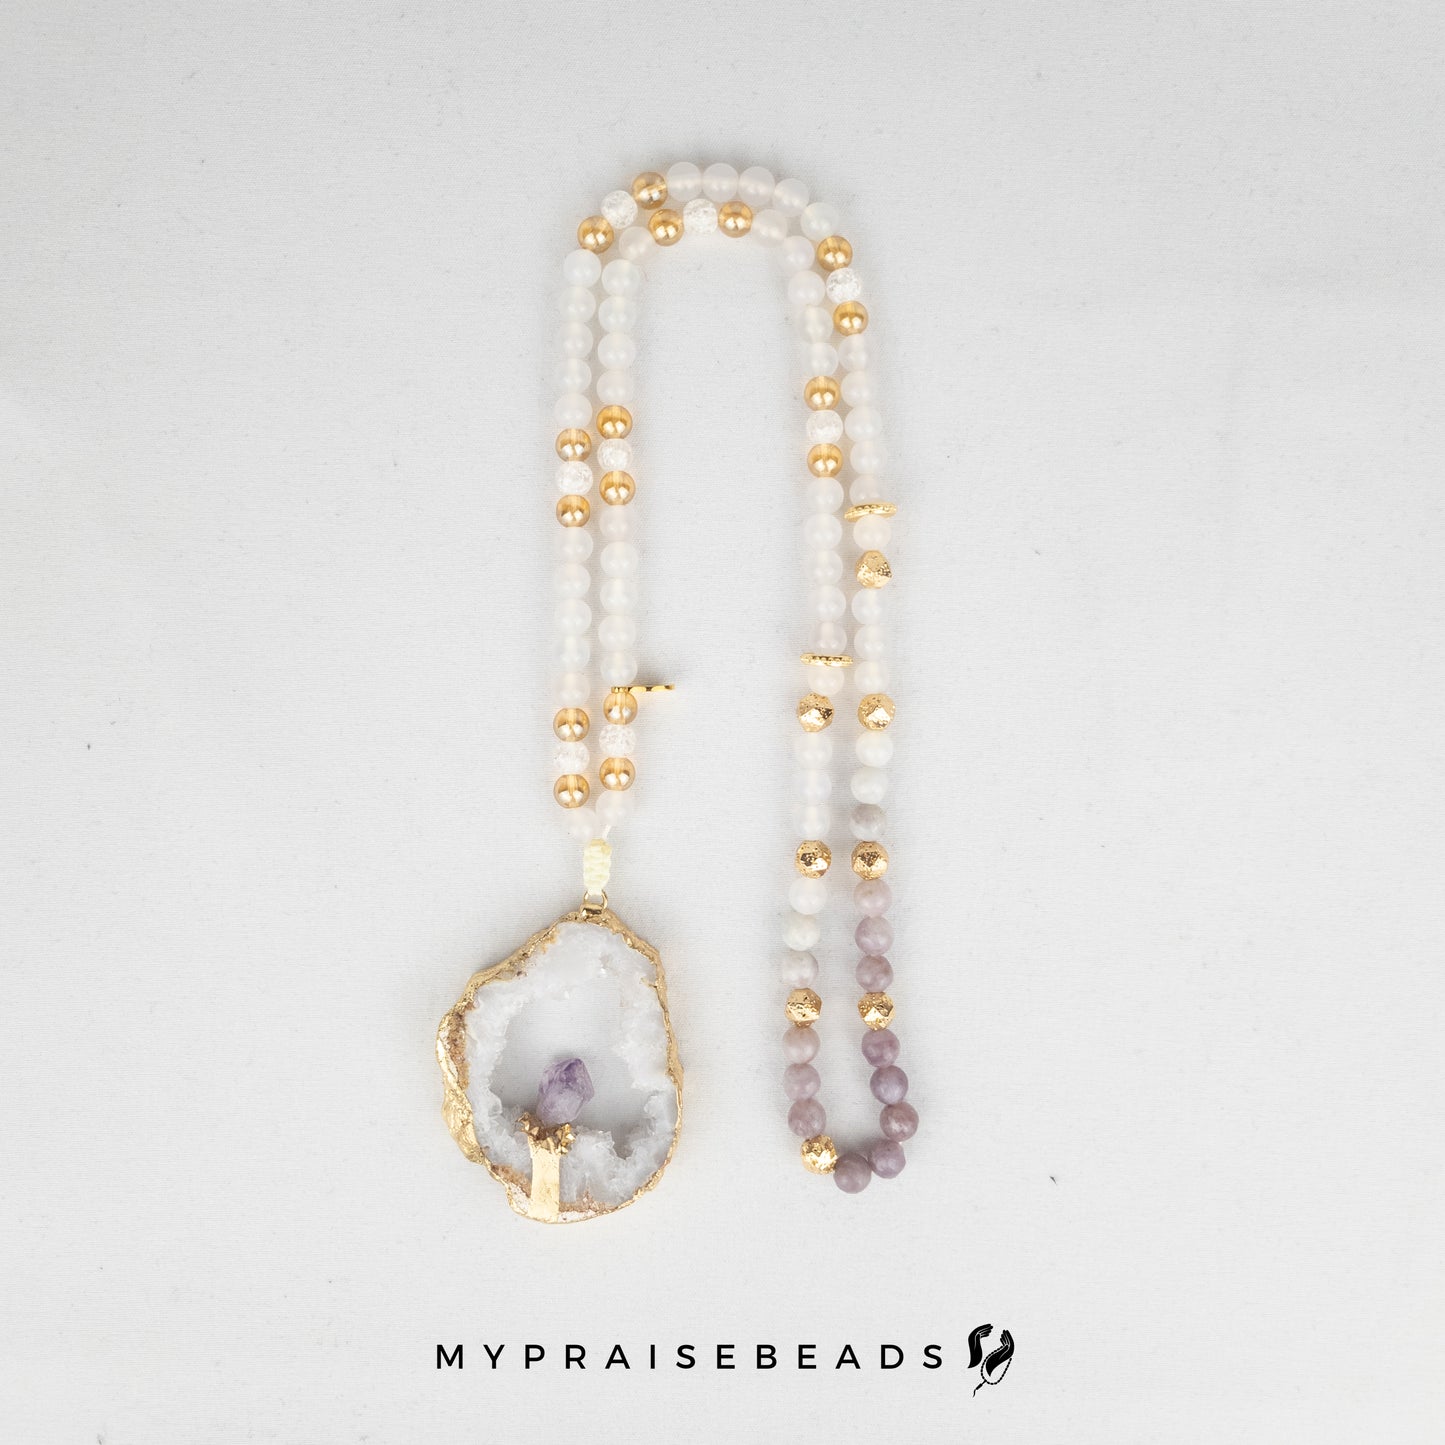 NEW - White Agate Ombre & Crystal Tasbih